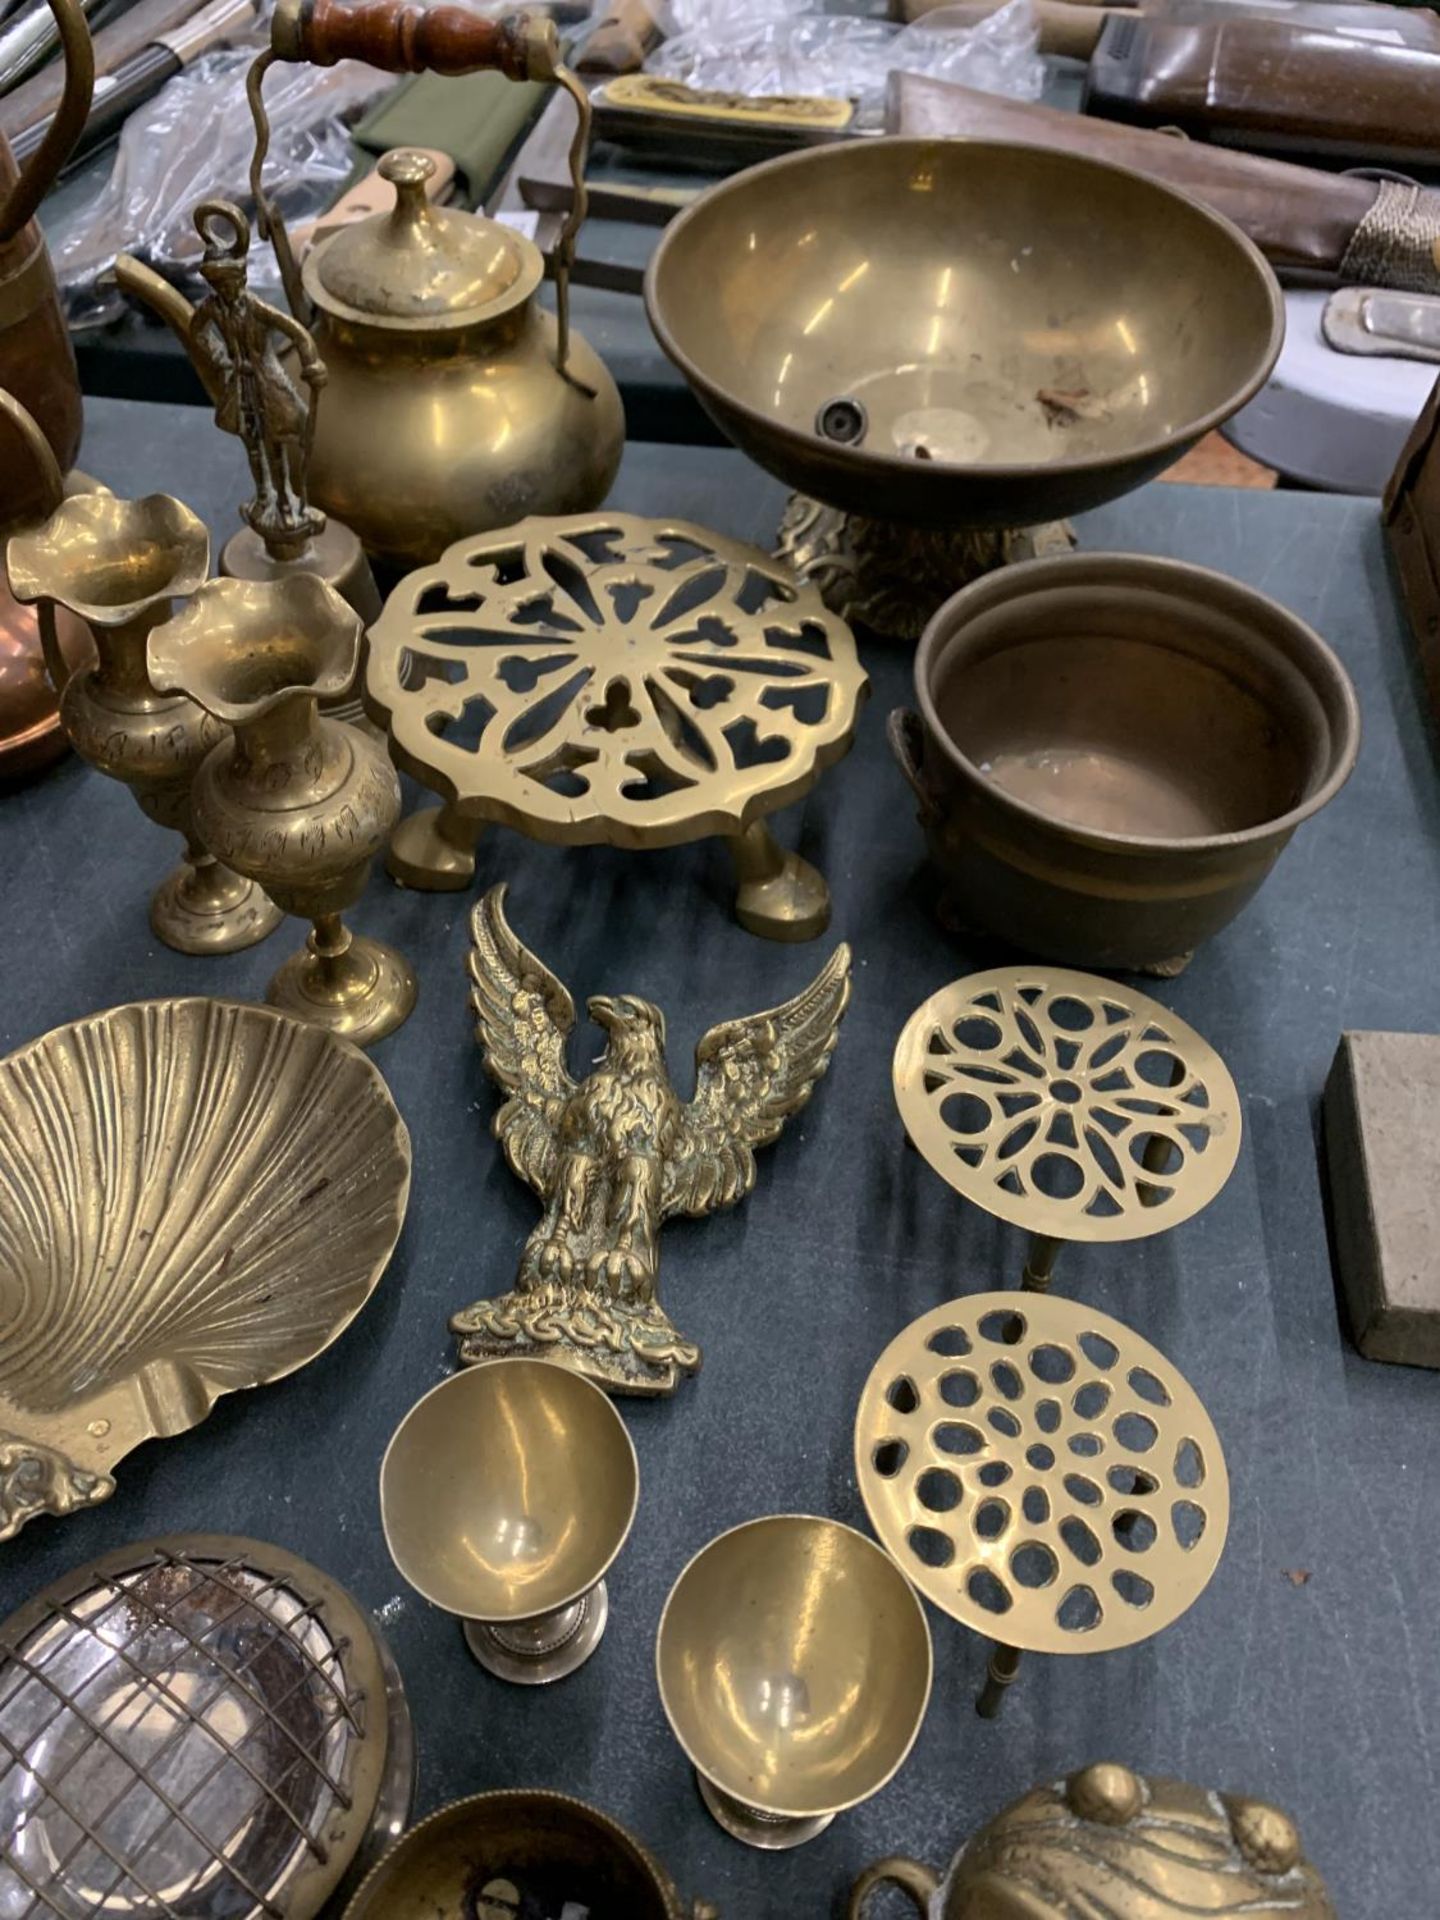 A LARGE COLLECTION OF BRASS AND COPPER WARE TO INCLUDE TRIVETS, BELLS, BOWLS, HORSE BRASSES ETC. - Image 5 of 7